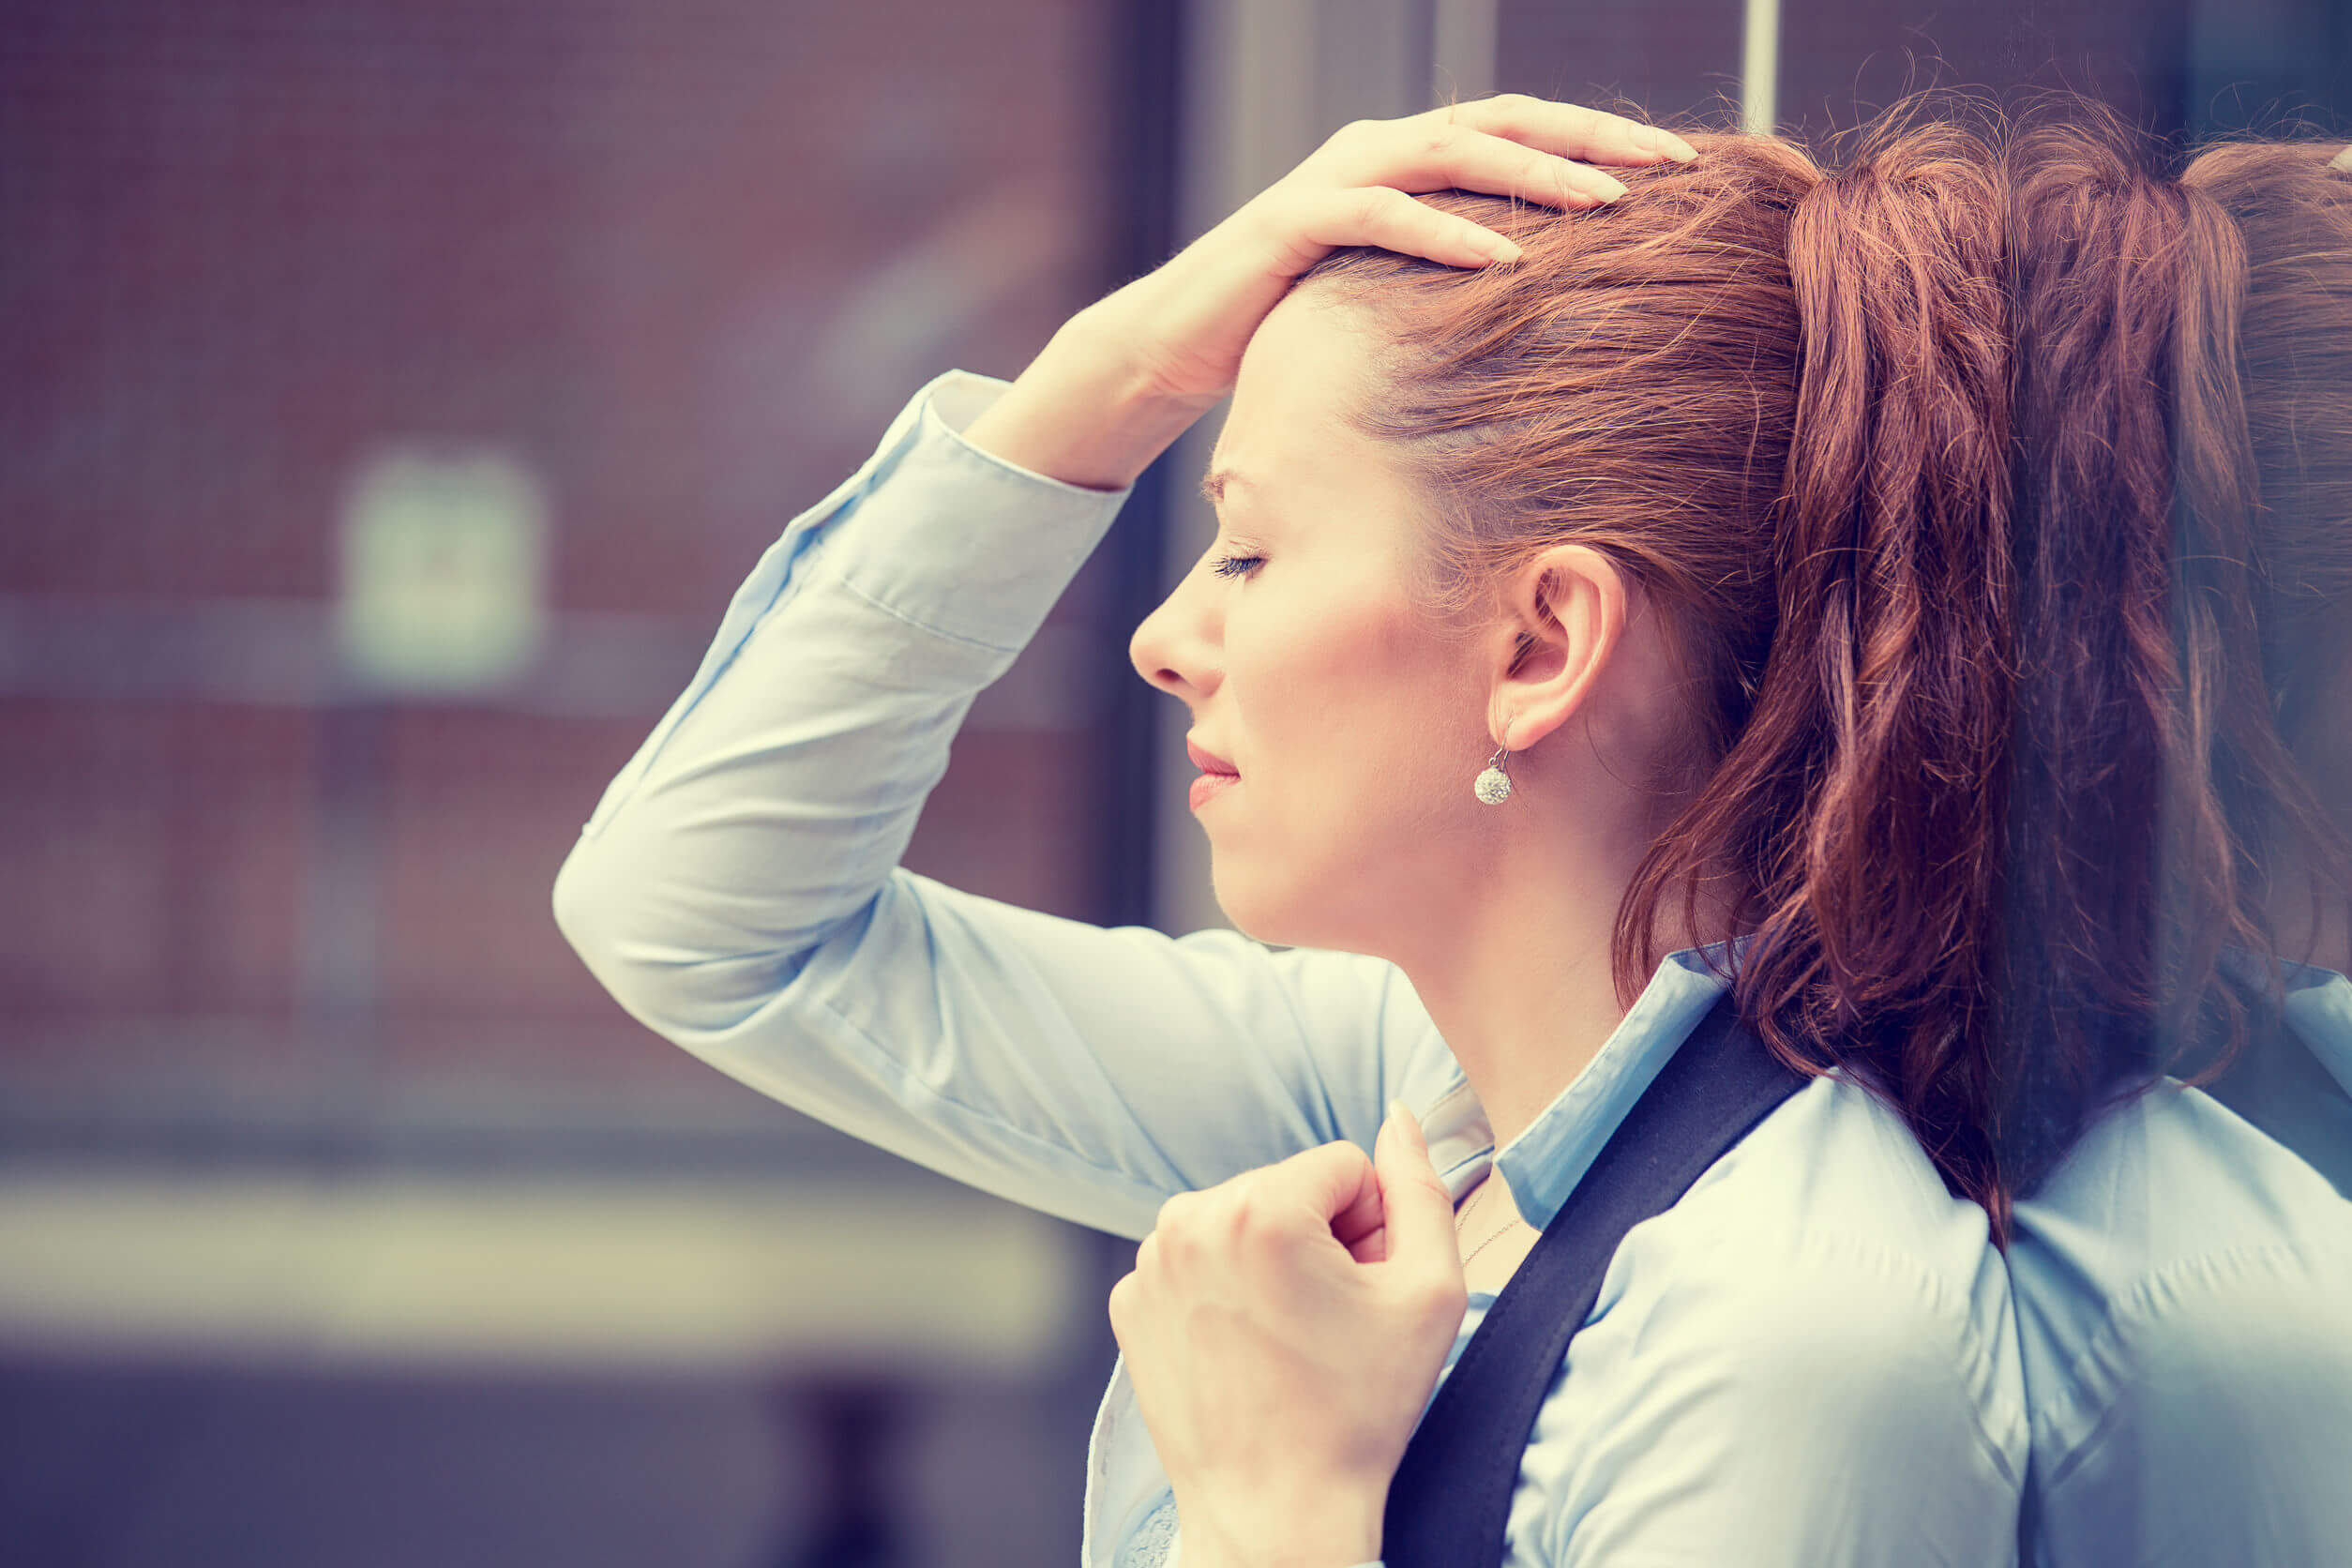 Menopausal anxiety is a relatively common problem